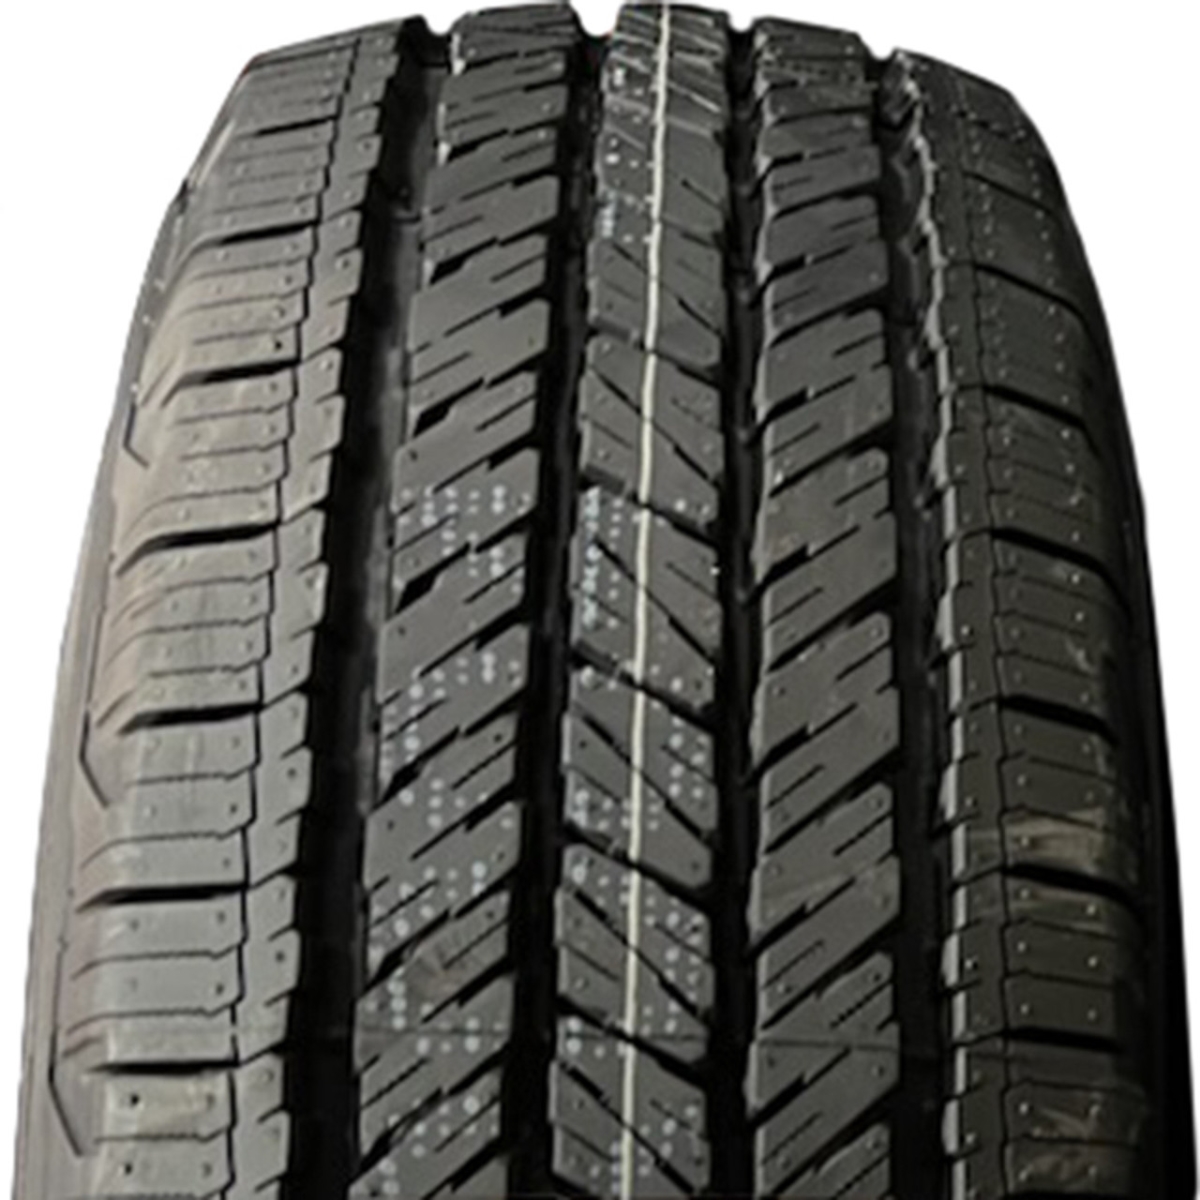 Picture of Maxxis Tire TP00377500 102H Ht-780 Razor HT Tire for 225-65R17